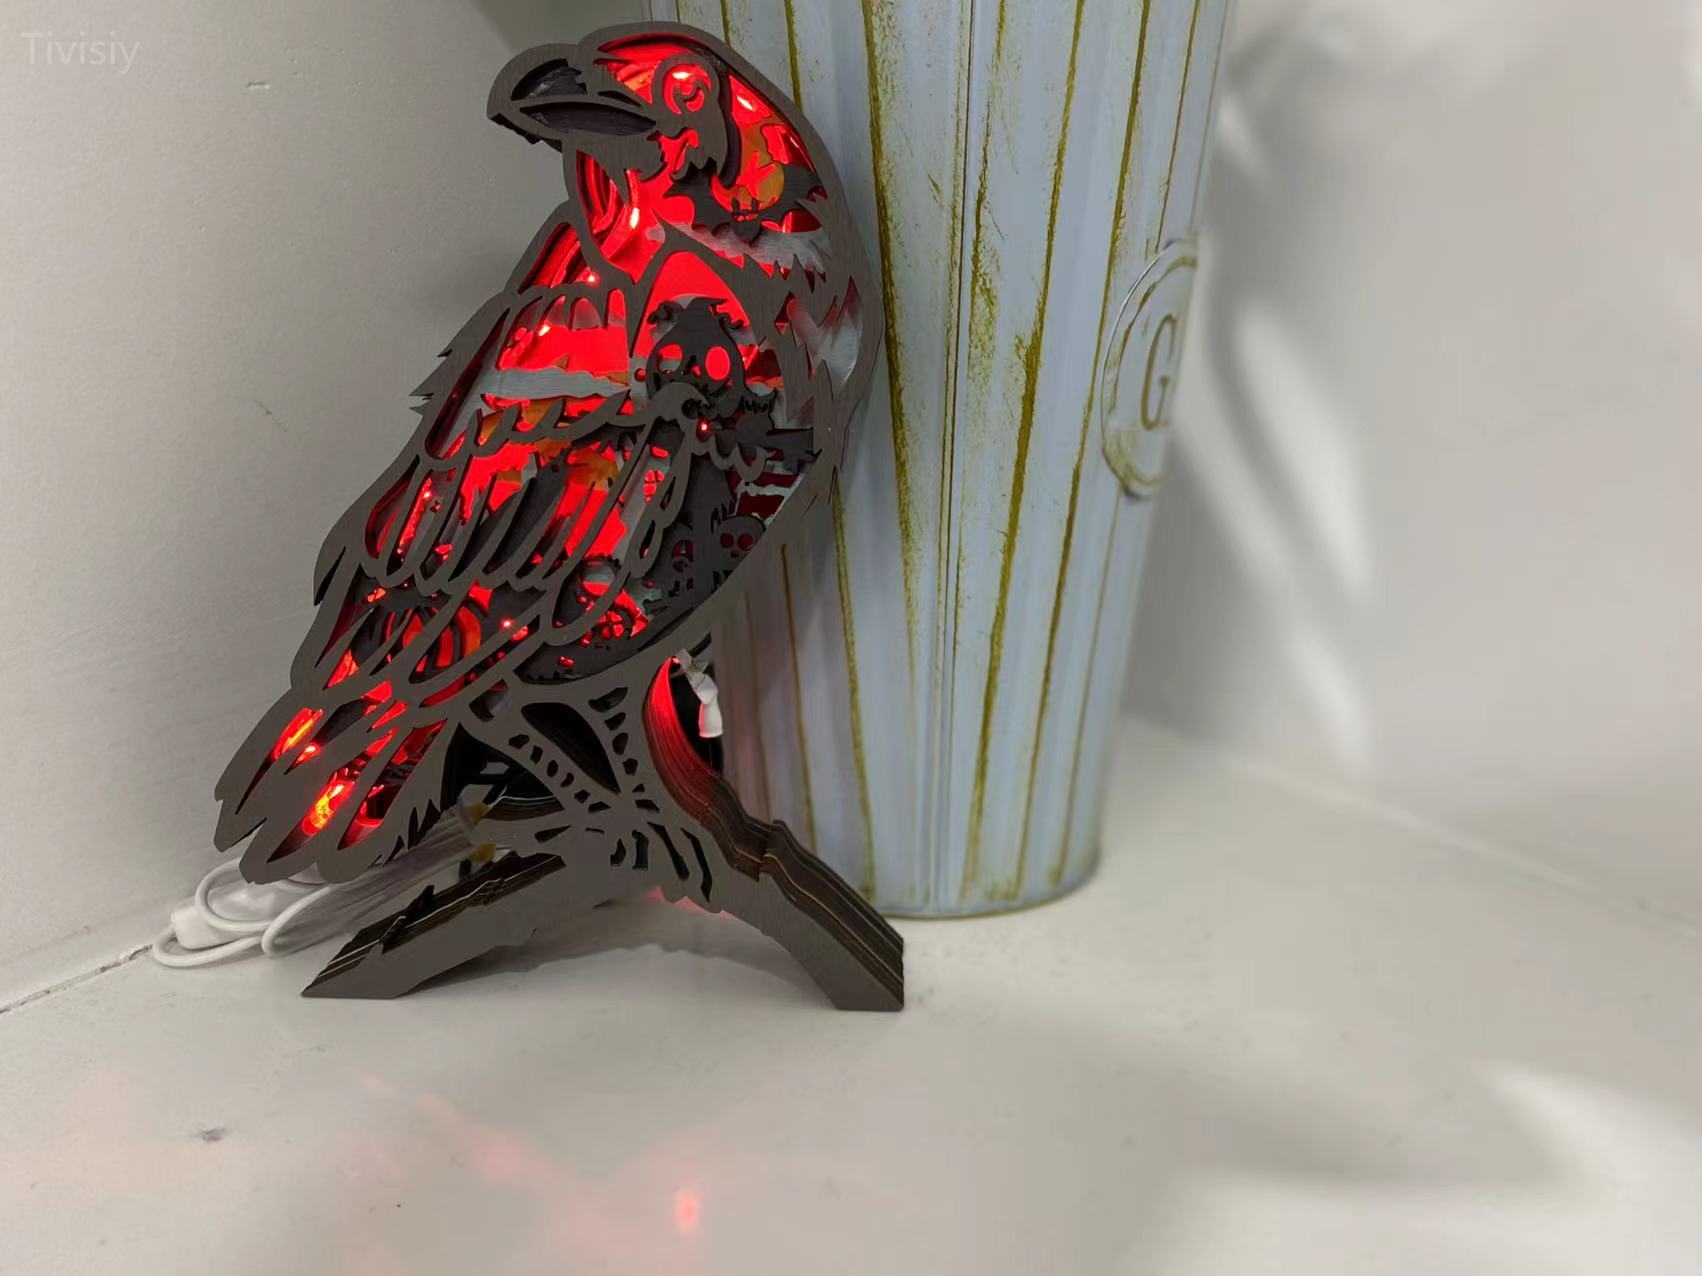 Crow Wooden Carving Gift,Crow Lamp Light for Home Decor